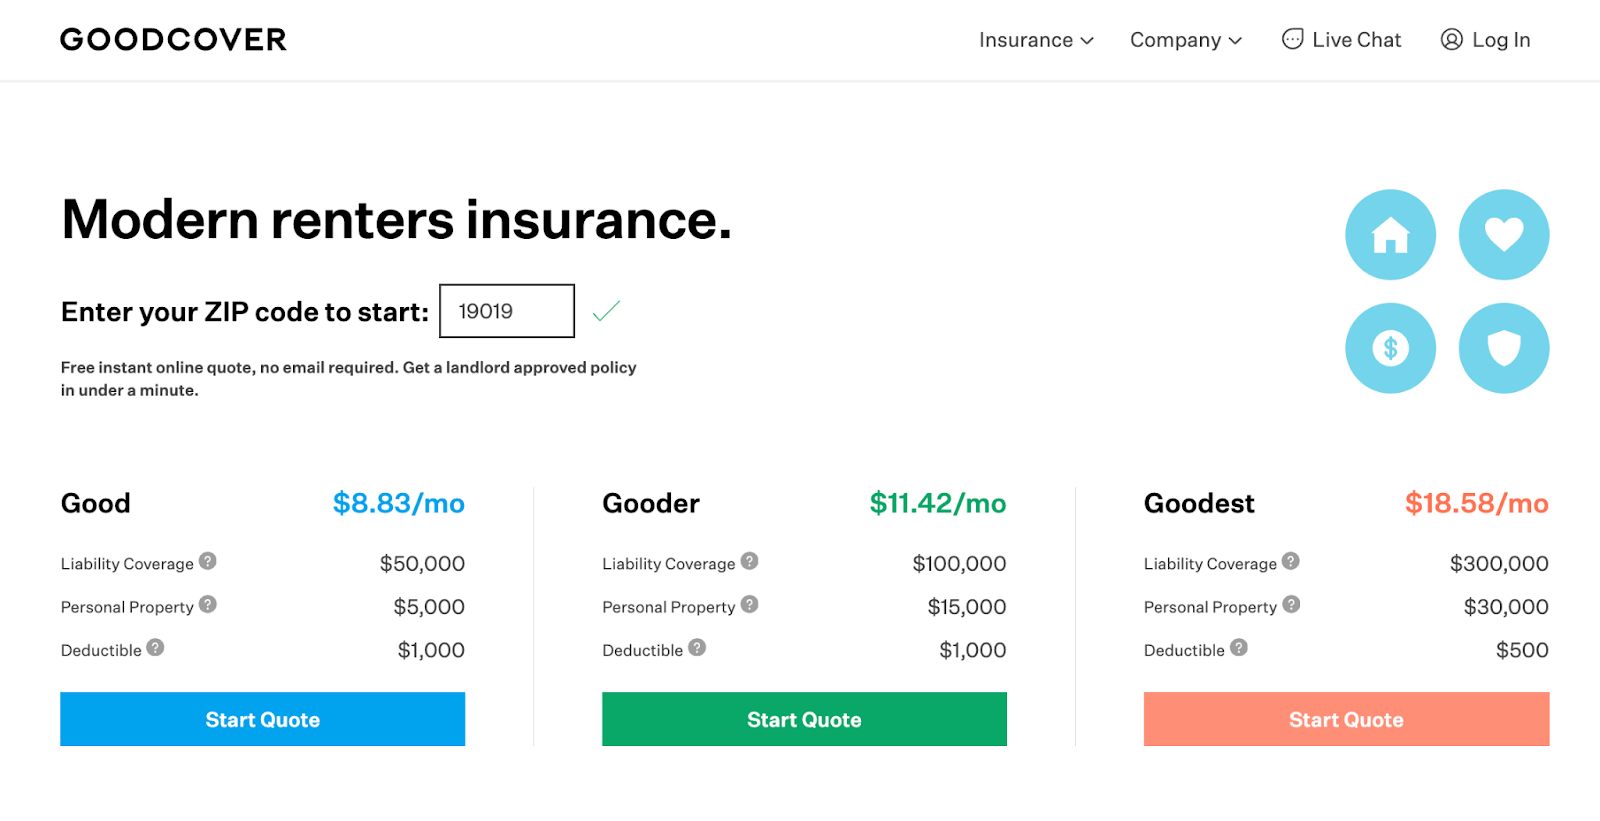 The cost of renters insurance in Pennsylvania for Goodcover.